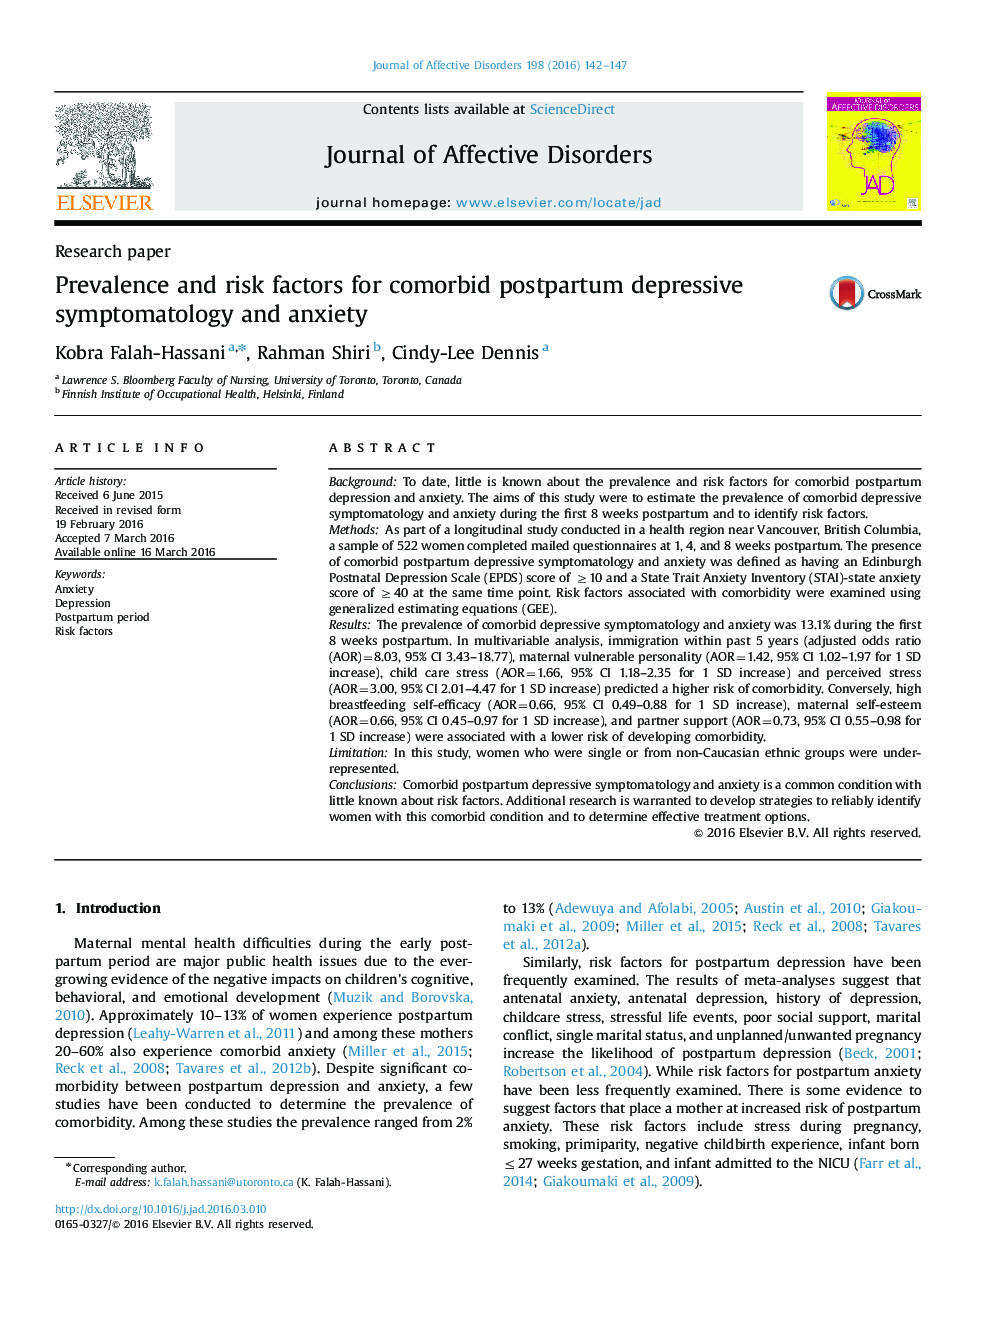 Prevalence and risk factors for comorbid postpartum depressive symptomatology and anxiety